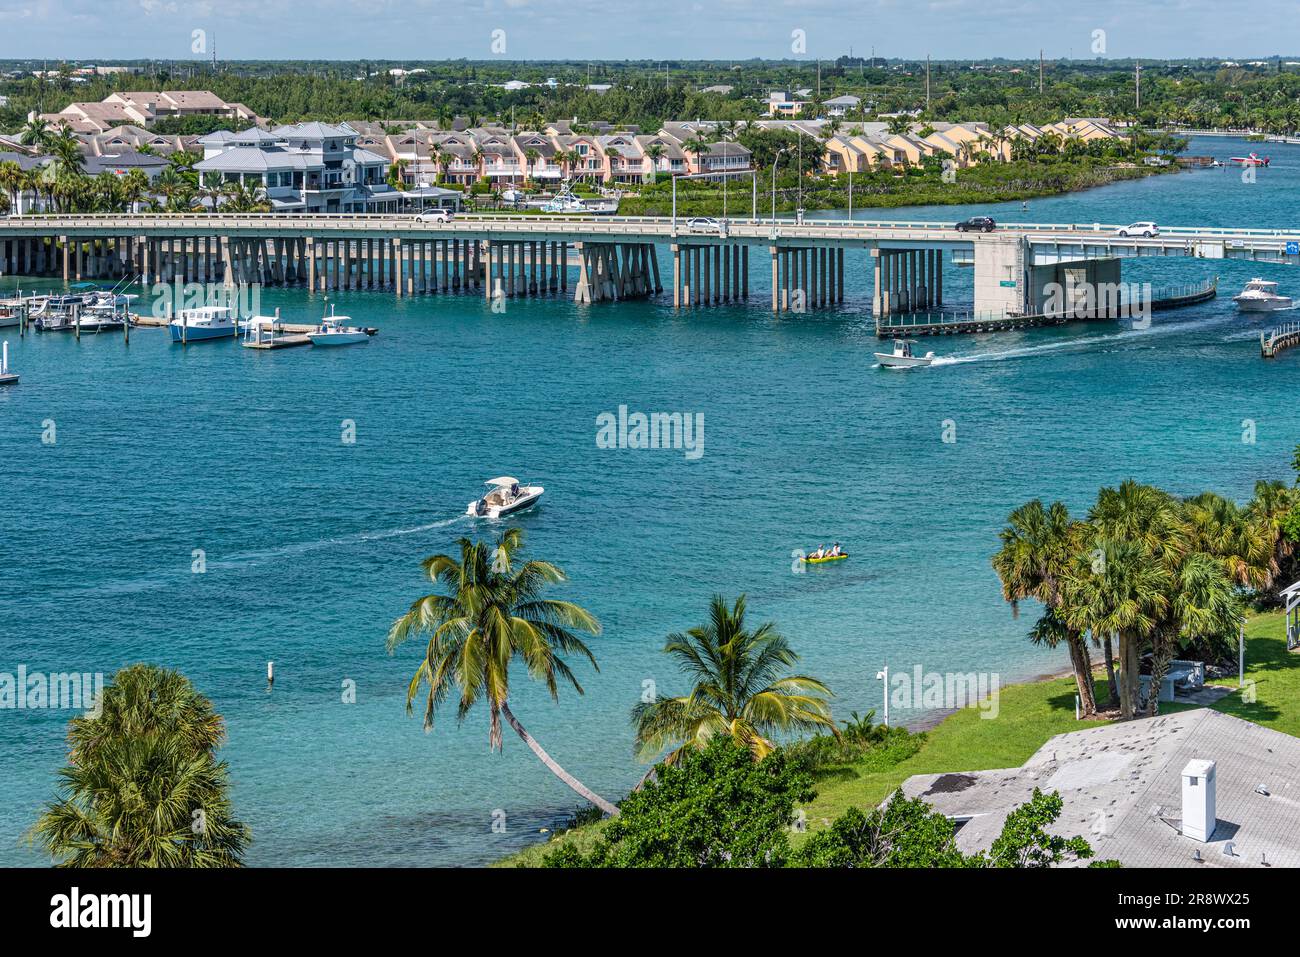 View of Jupiter Inlet boating activity around Carlin Bridge on U.S. Highway 1 in Jupiter, Florida, at the north end of Palm Beach County. (USA) Stock Photo